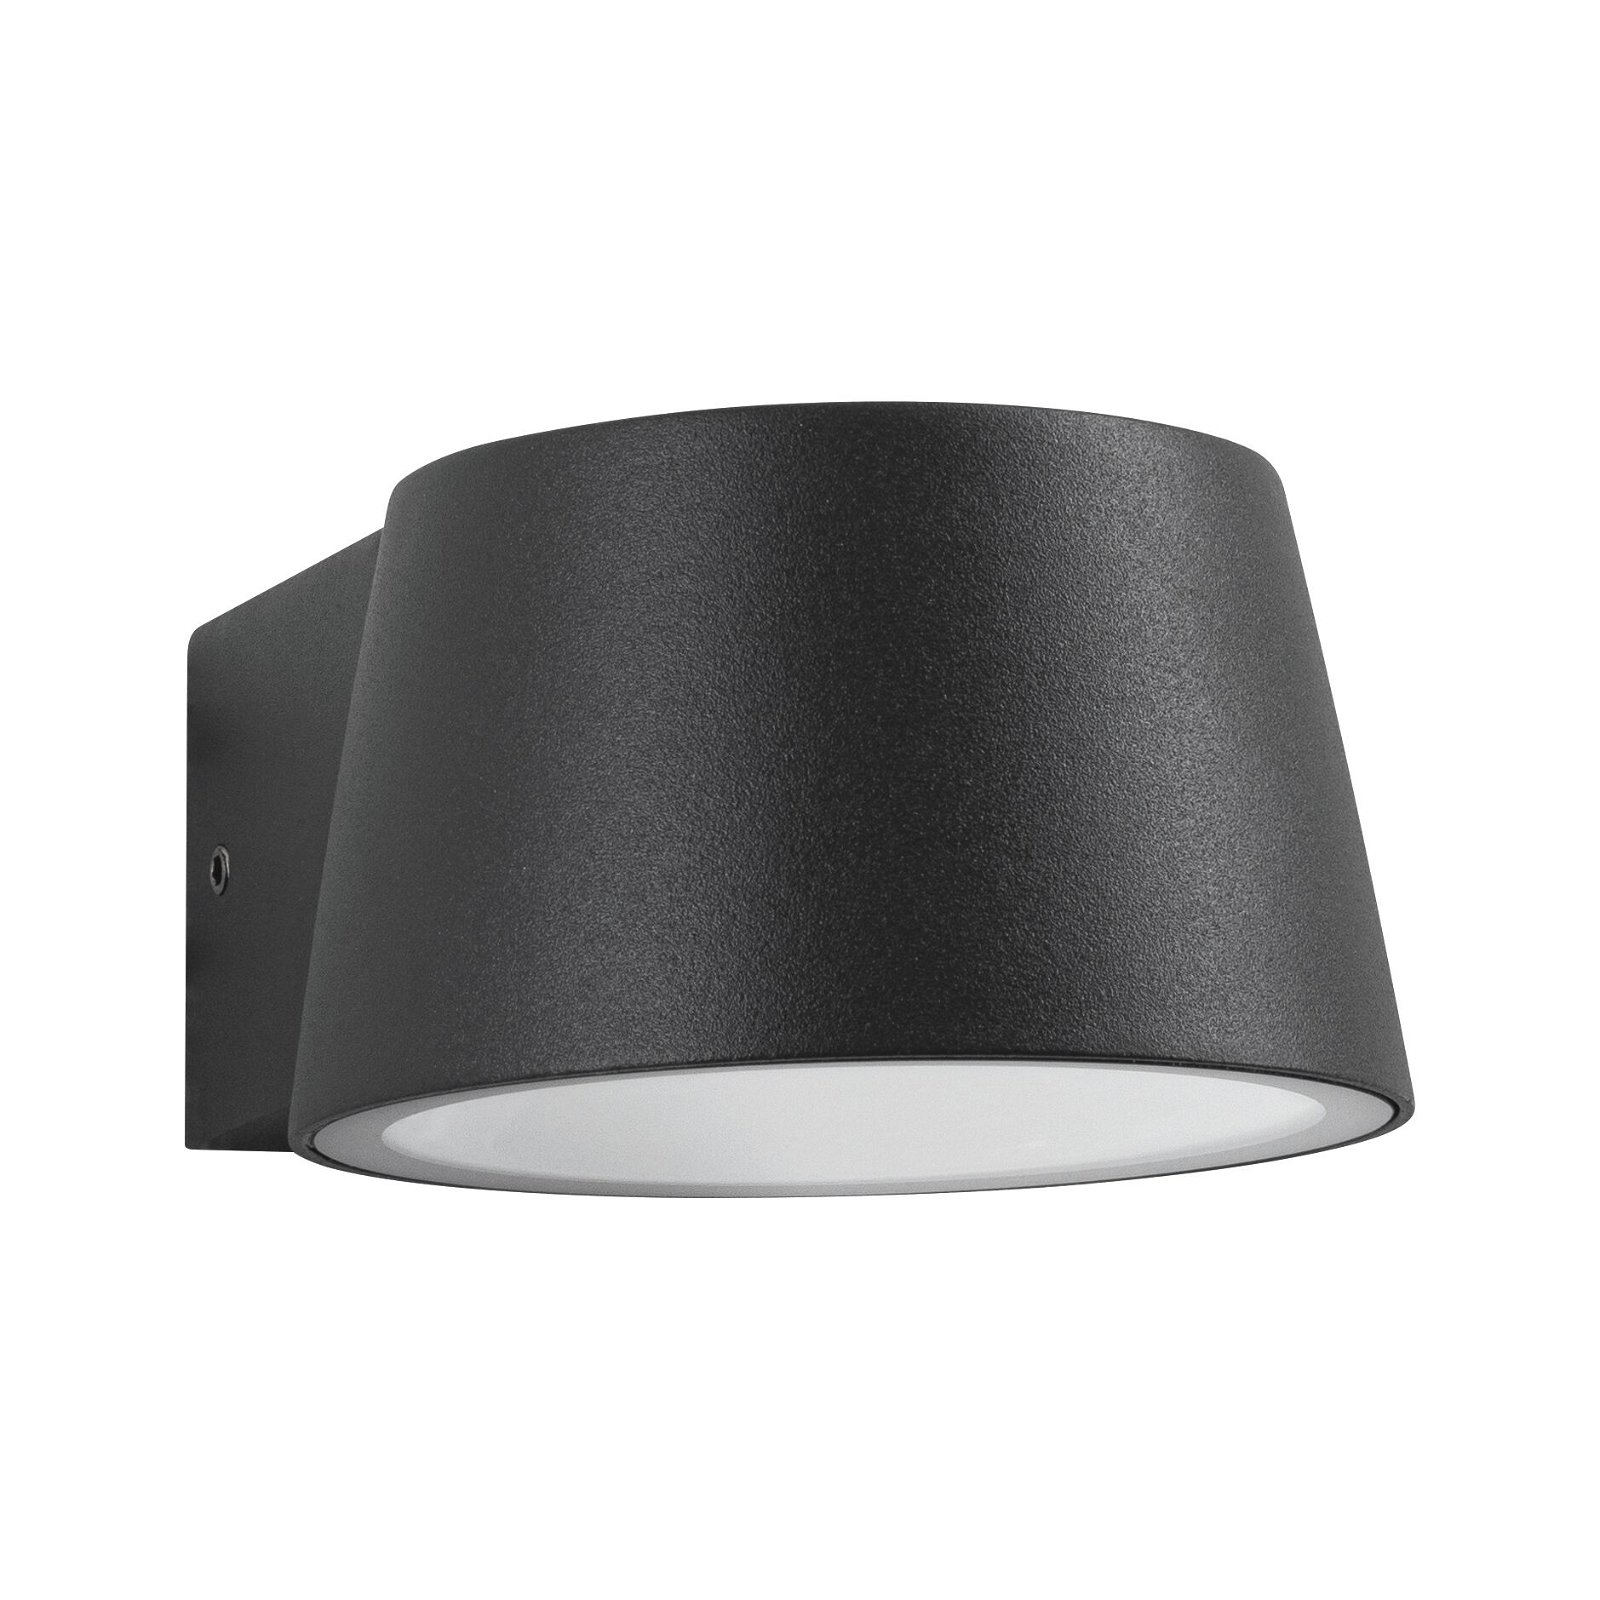 LED Exterior wall luminaire Capea insect friendly IP44 96x128mm 2200K 6W 550lm 230V 98° Anthracite Aluminium